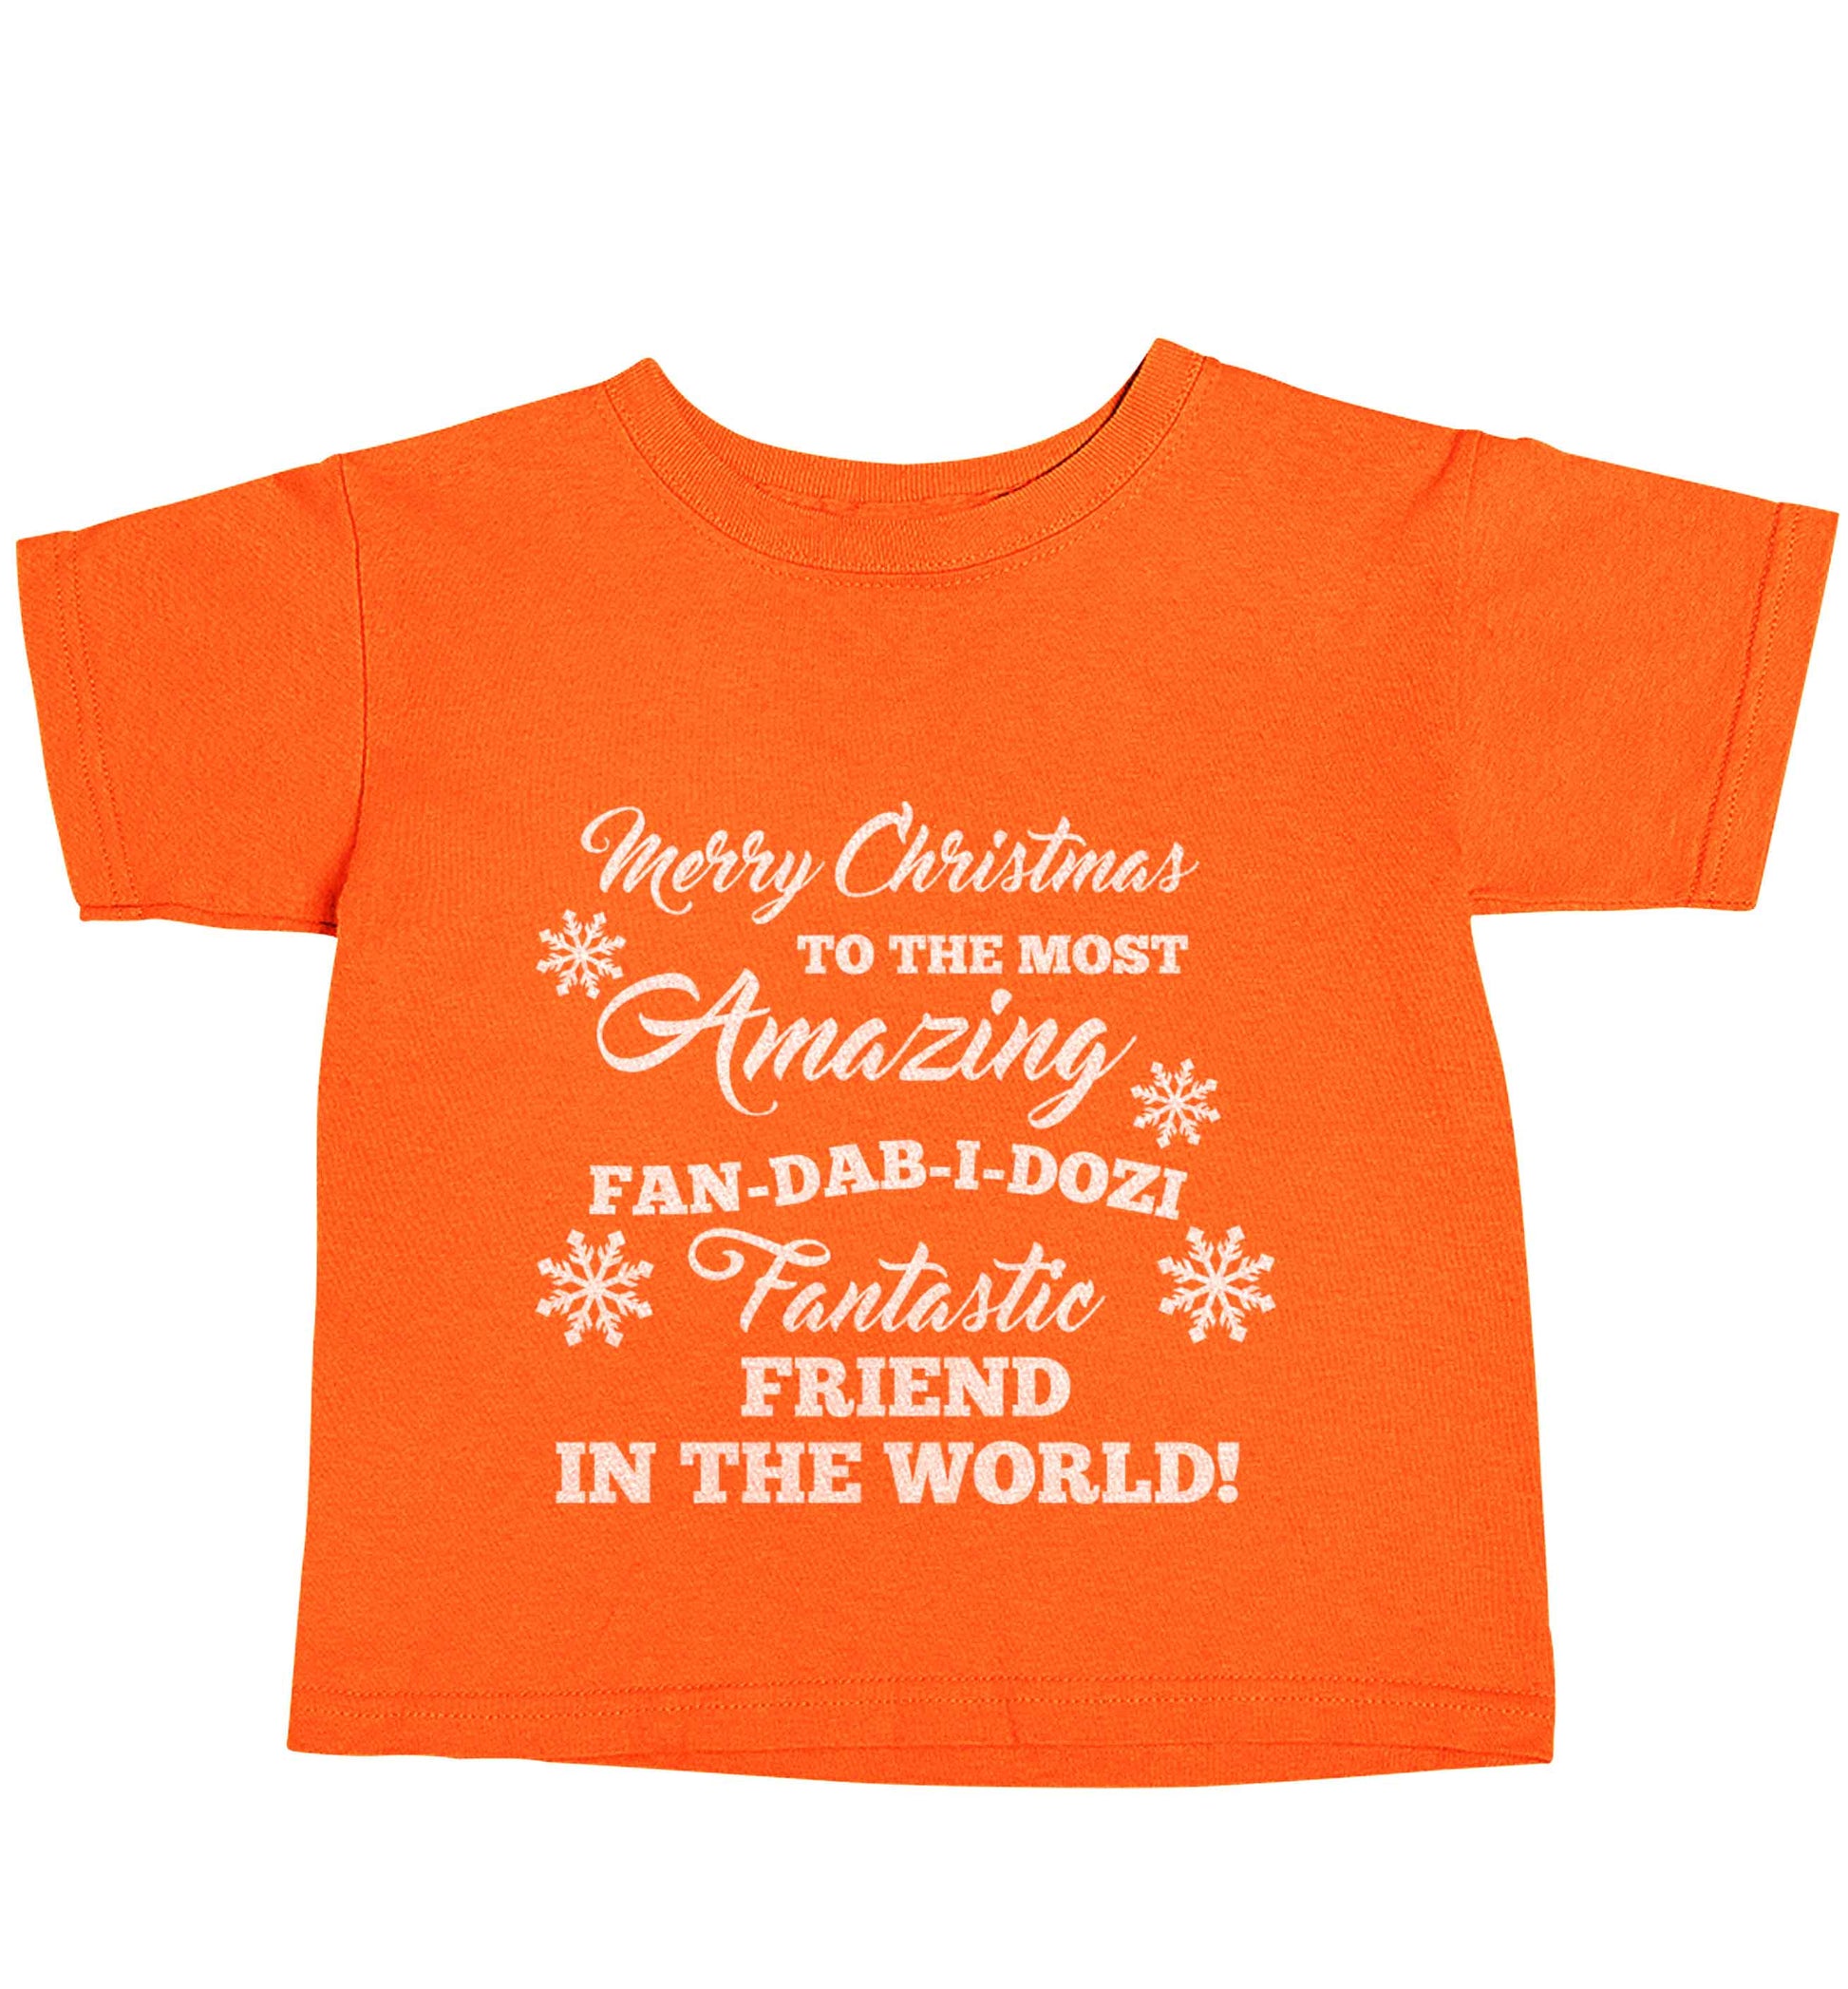 Merry Christmas to the most amazing fan-dab-i-dozi fantasic friend in the world orange baby toddler Tshirt 2 Years